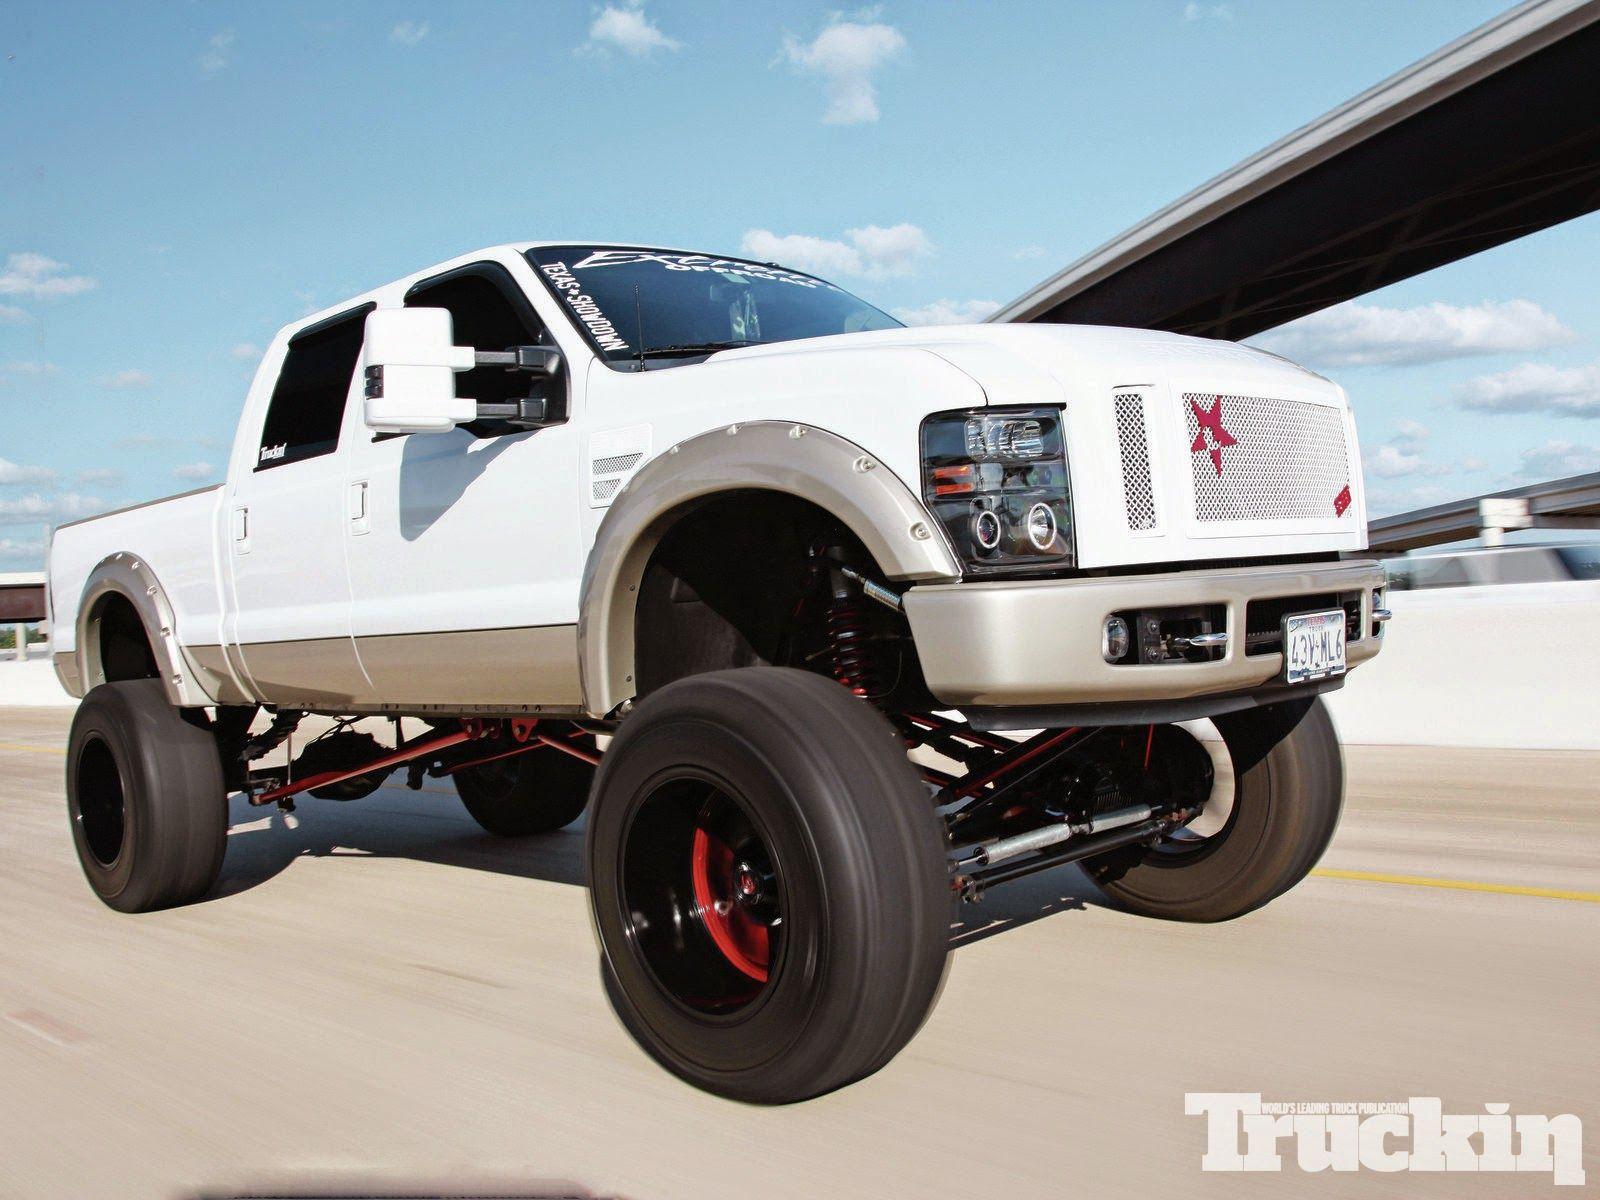 Lifted Truck Wallpapers   Top Free Lifted Truck Backgrounds